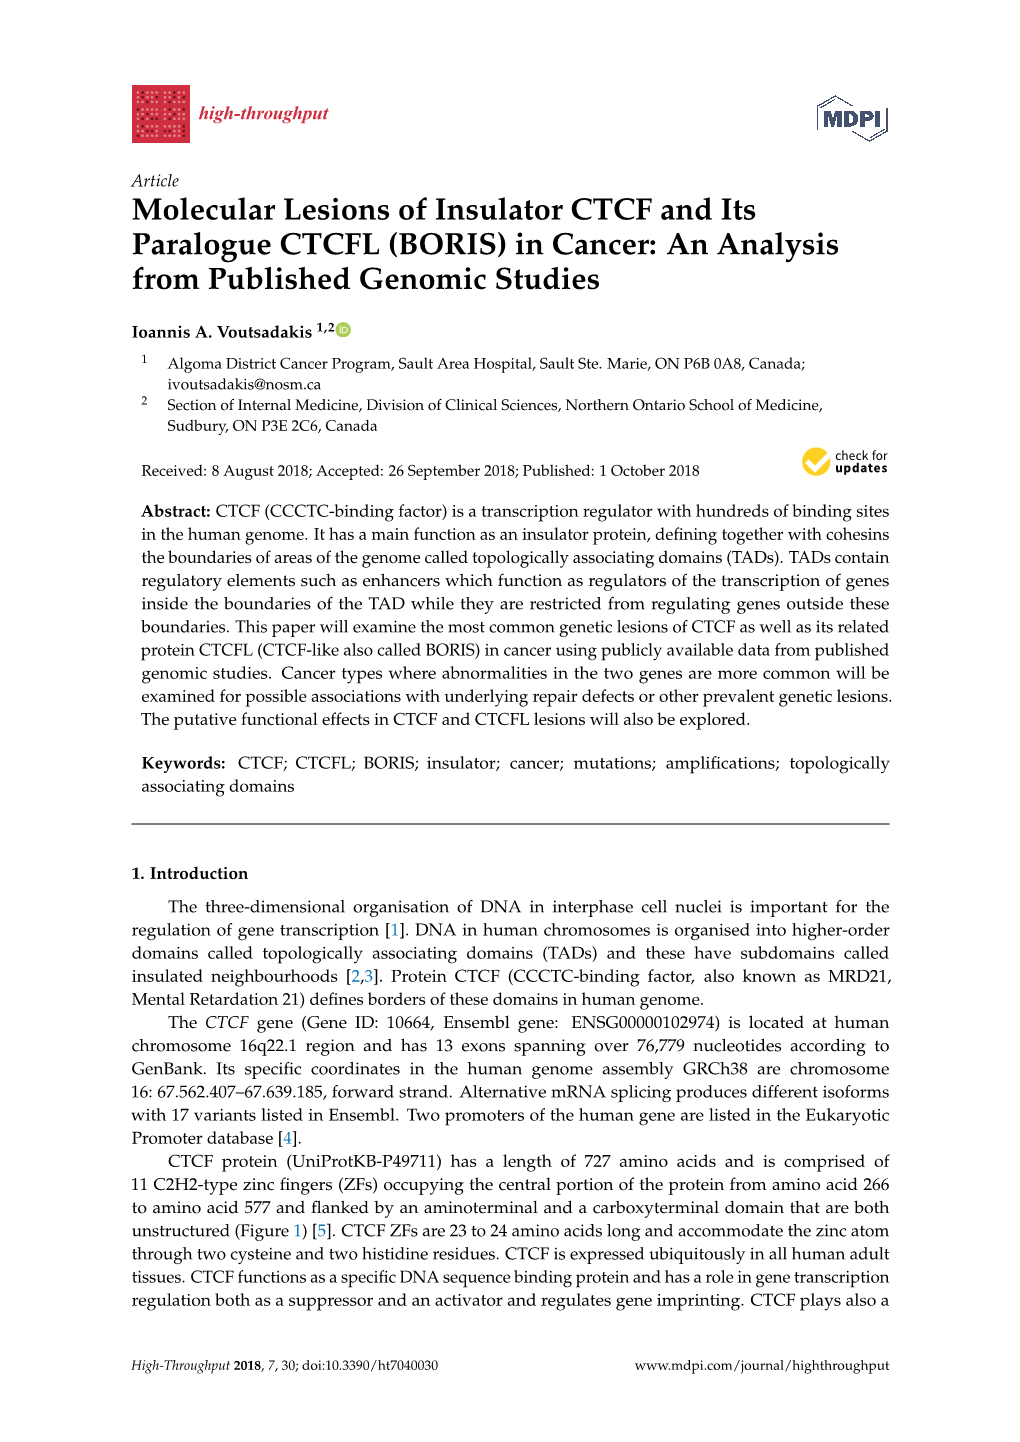 Molecular Lesions of Insulator CTCF and Its Paralogue CTCFL (BORIS) in Cancer: an Analysis from Published Genomic Studies